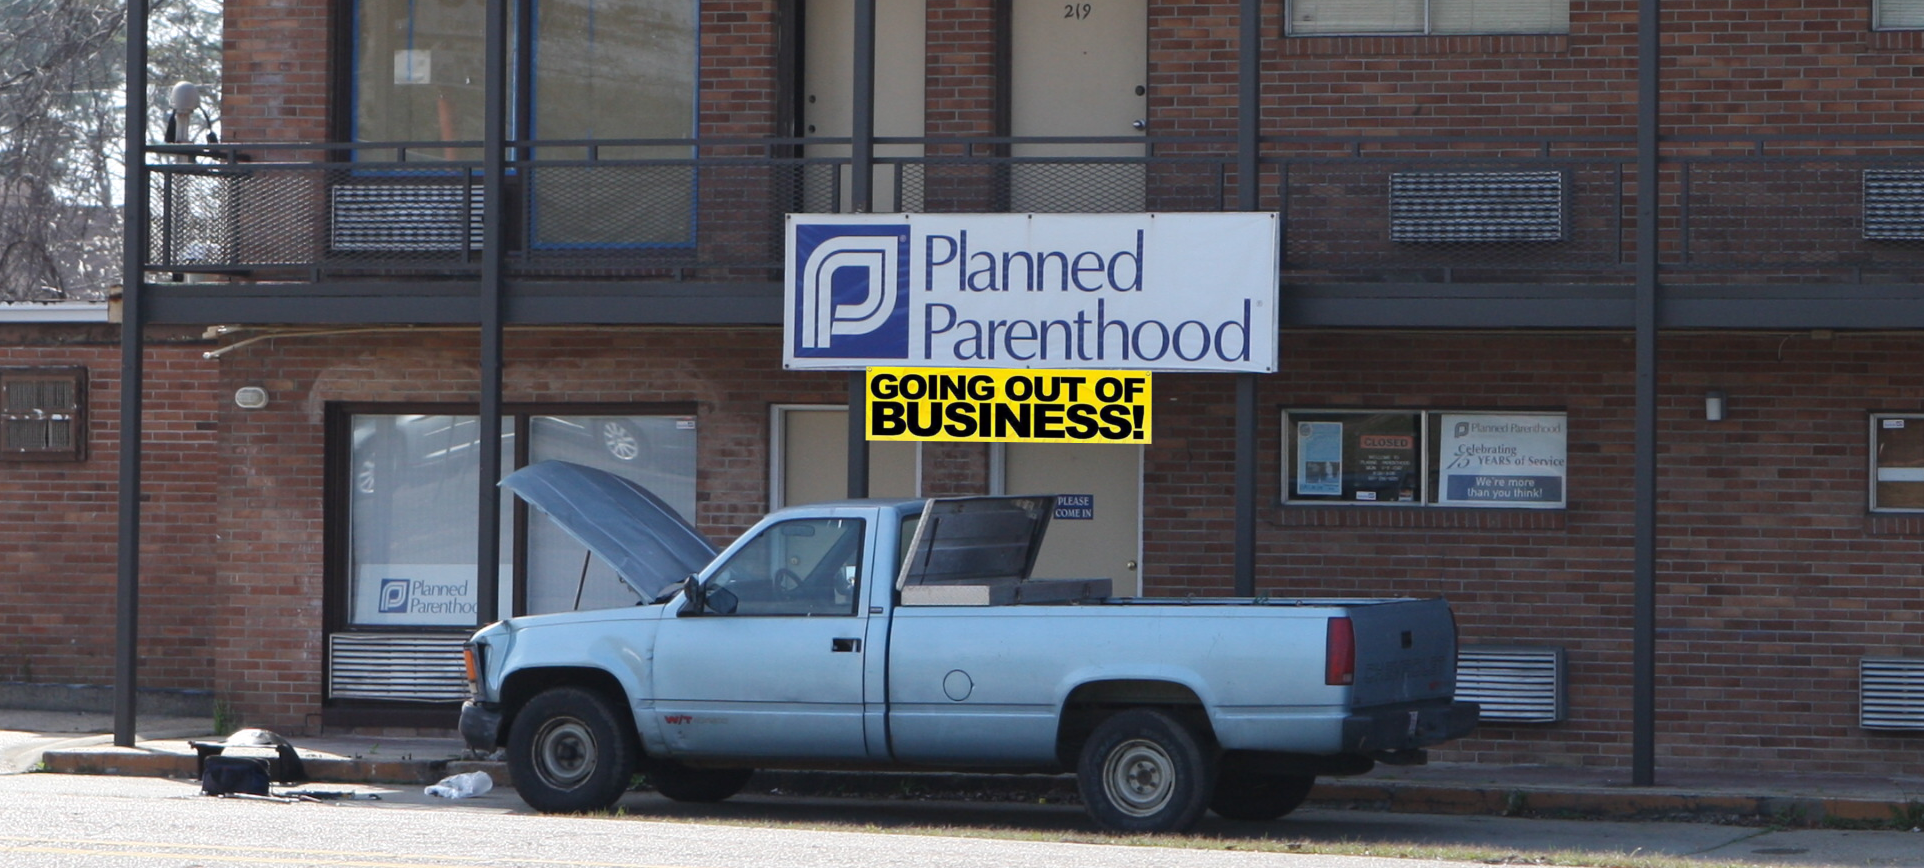 planned parenthood out of business